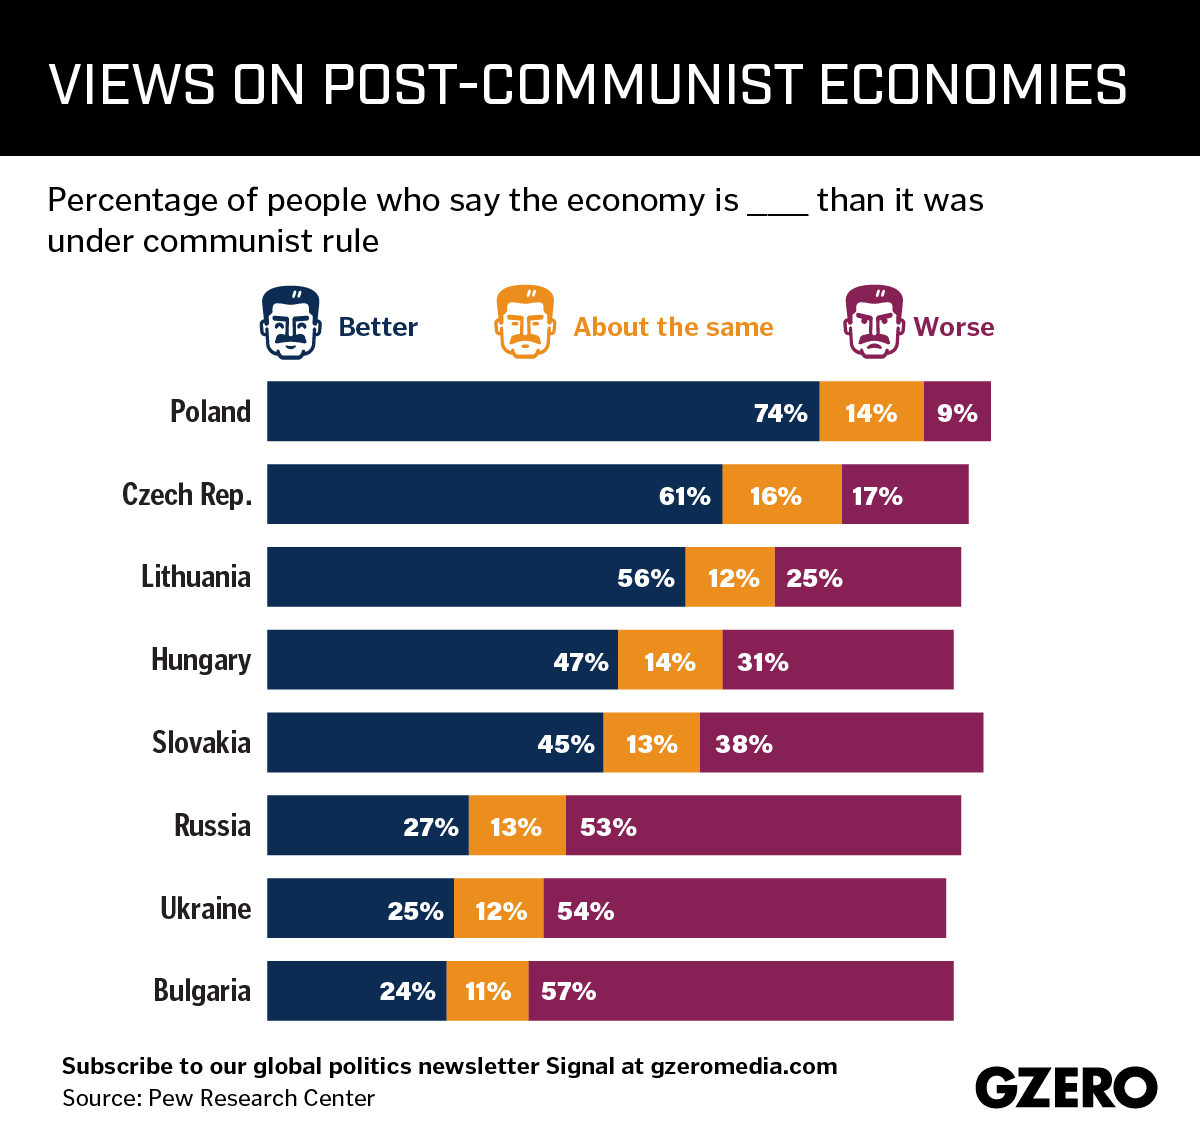 Graphic Truth: Mixed views on post-communist economies